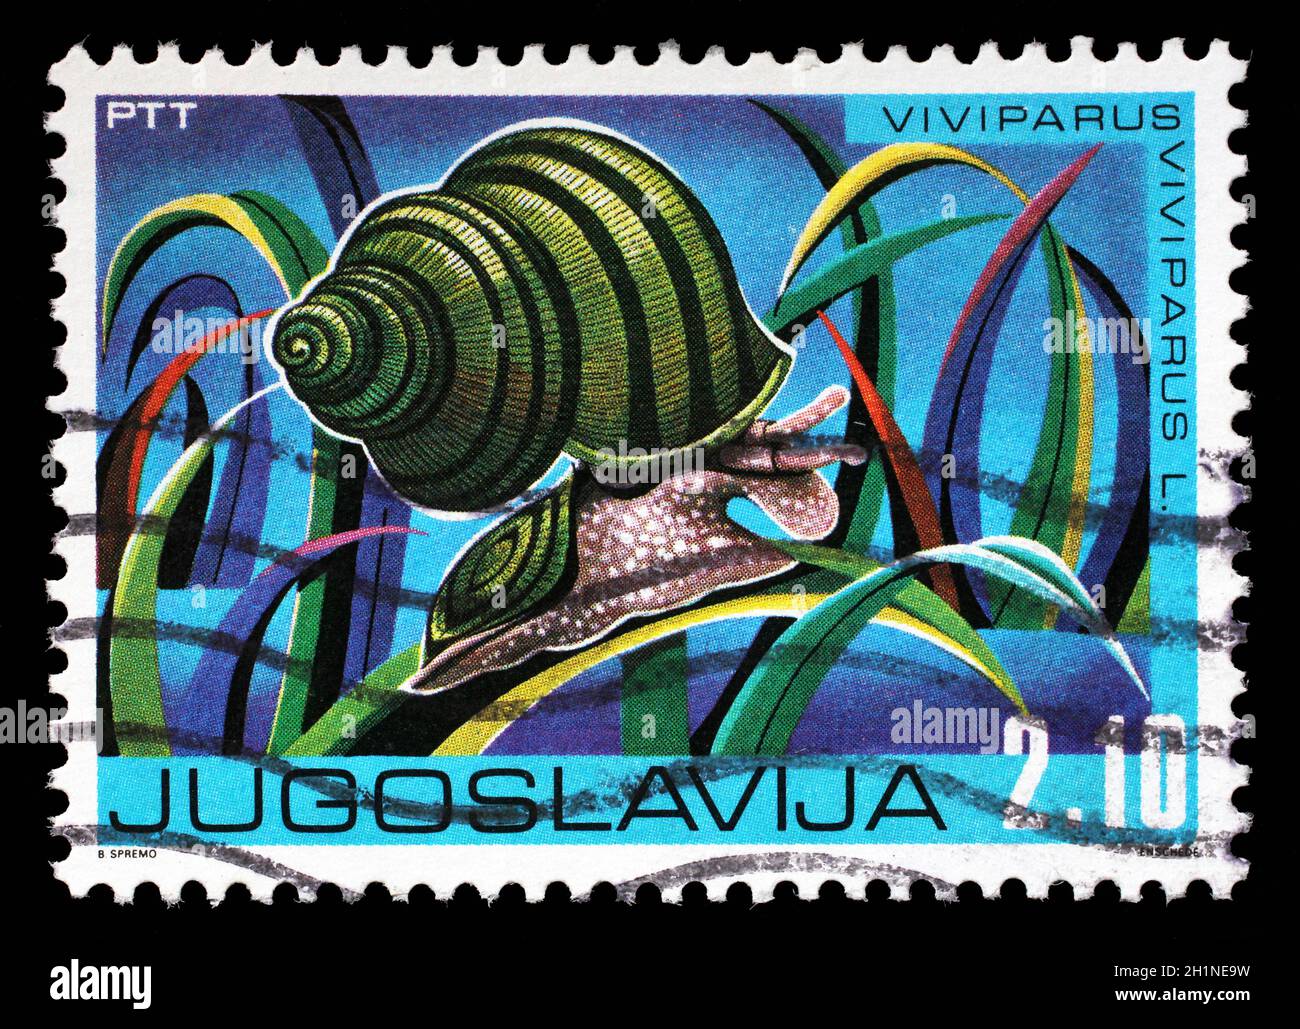 Stamp issued in Yugoslavia shows River Snail (Viviparus viviparus), Animals in Wetlands series, circa 1976. Stock Photo